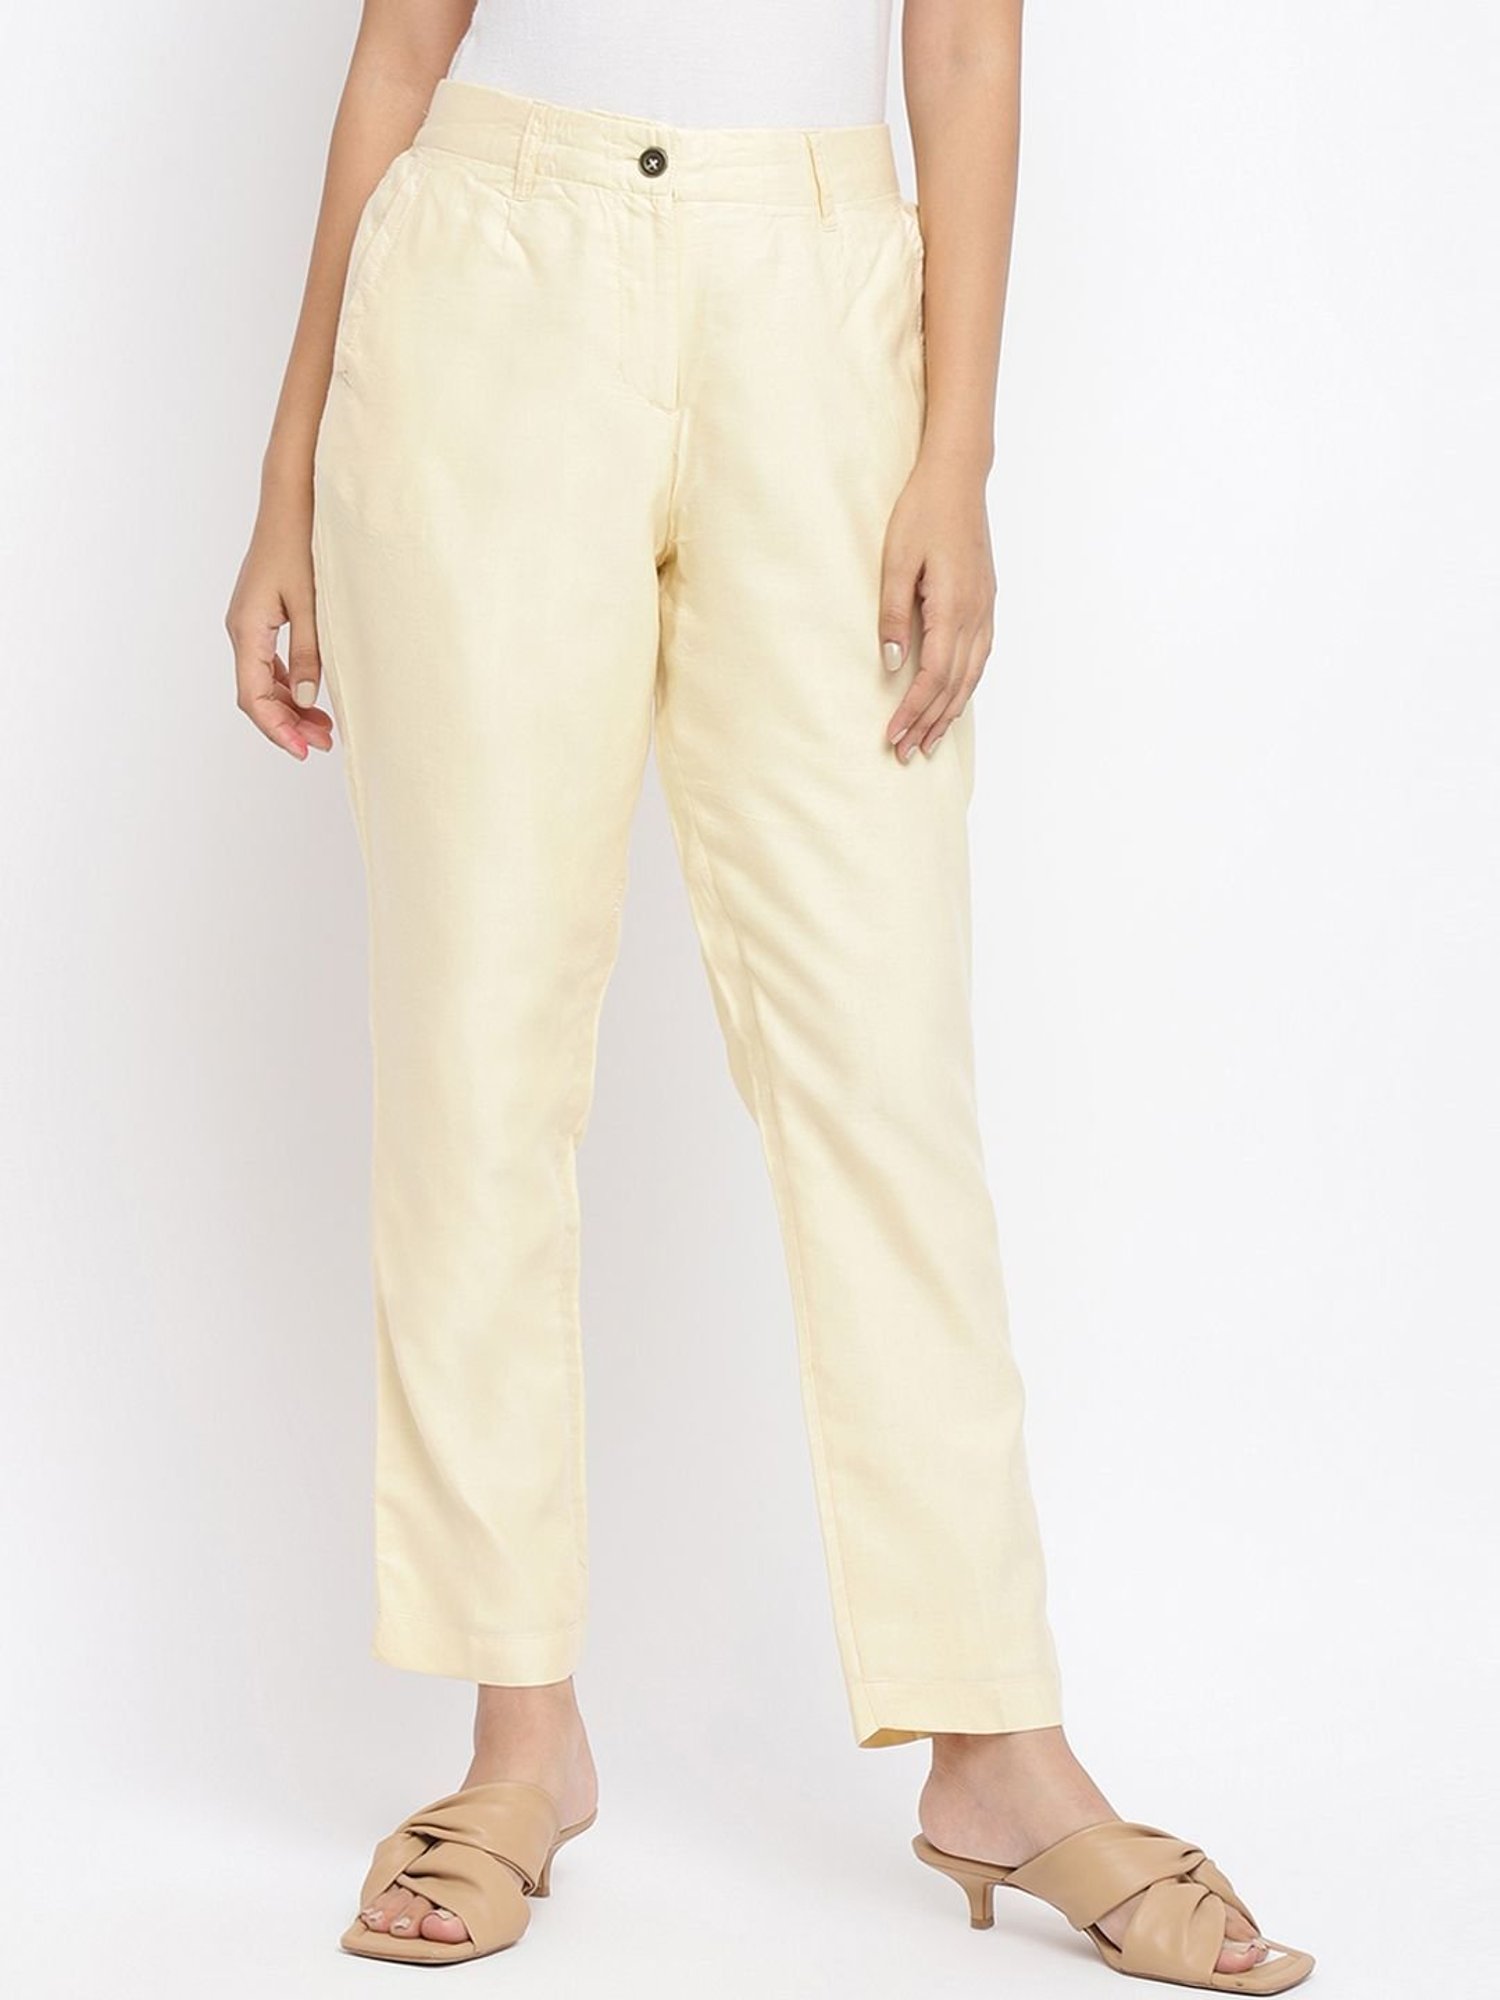 Buy Cream-coloured Trousers & Pants for Women by AJIO Online | Ajio.com